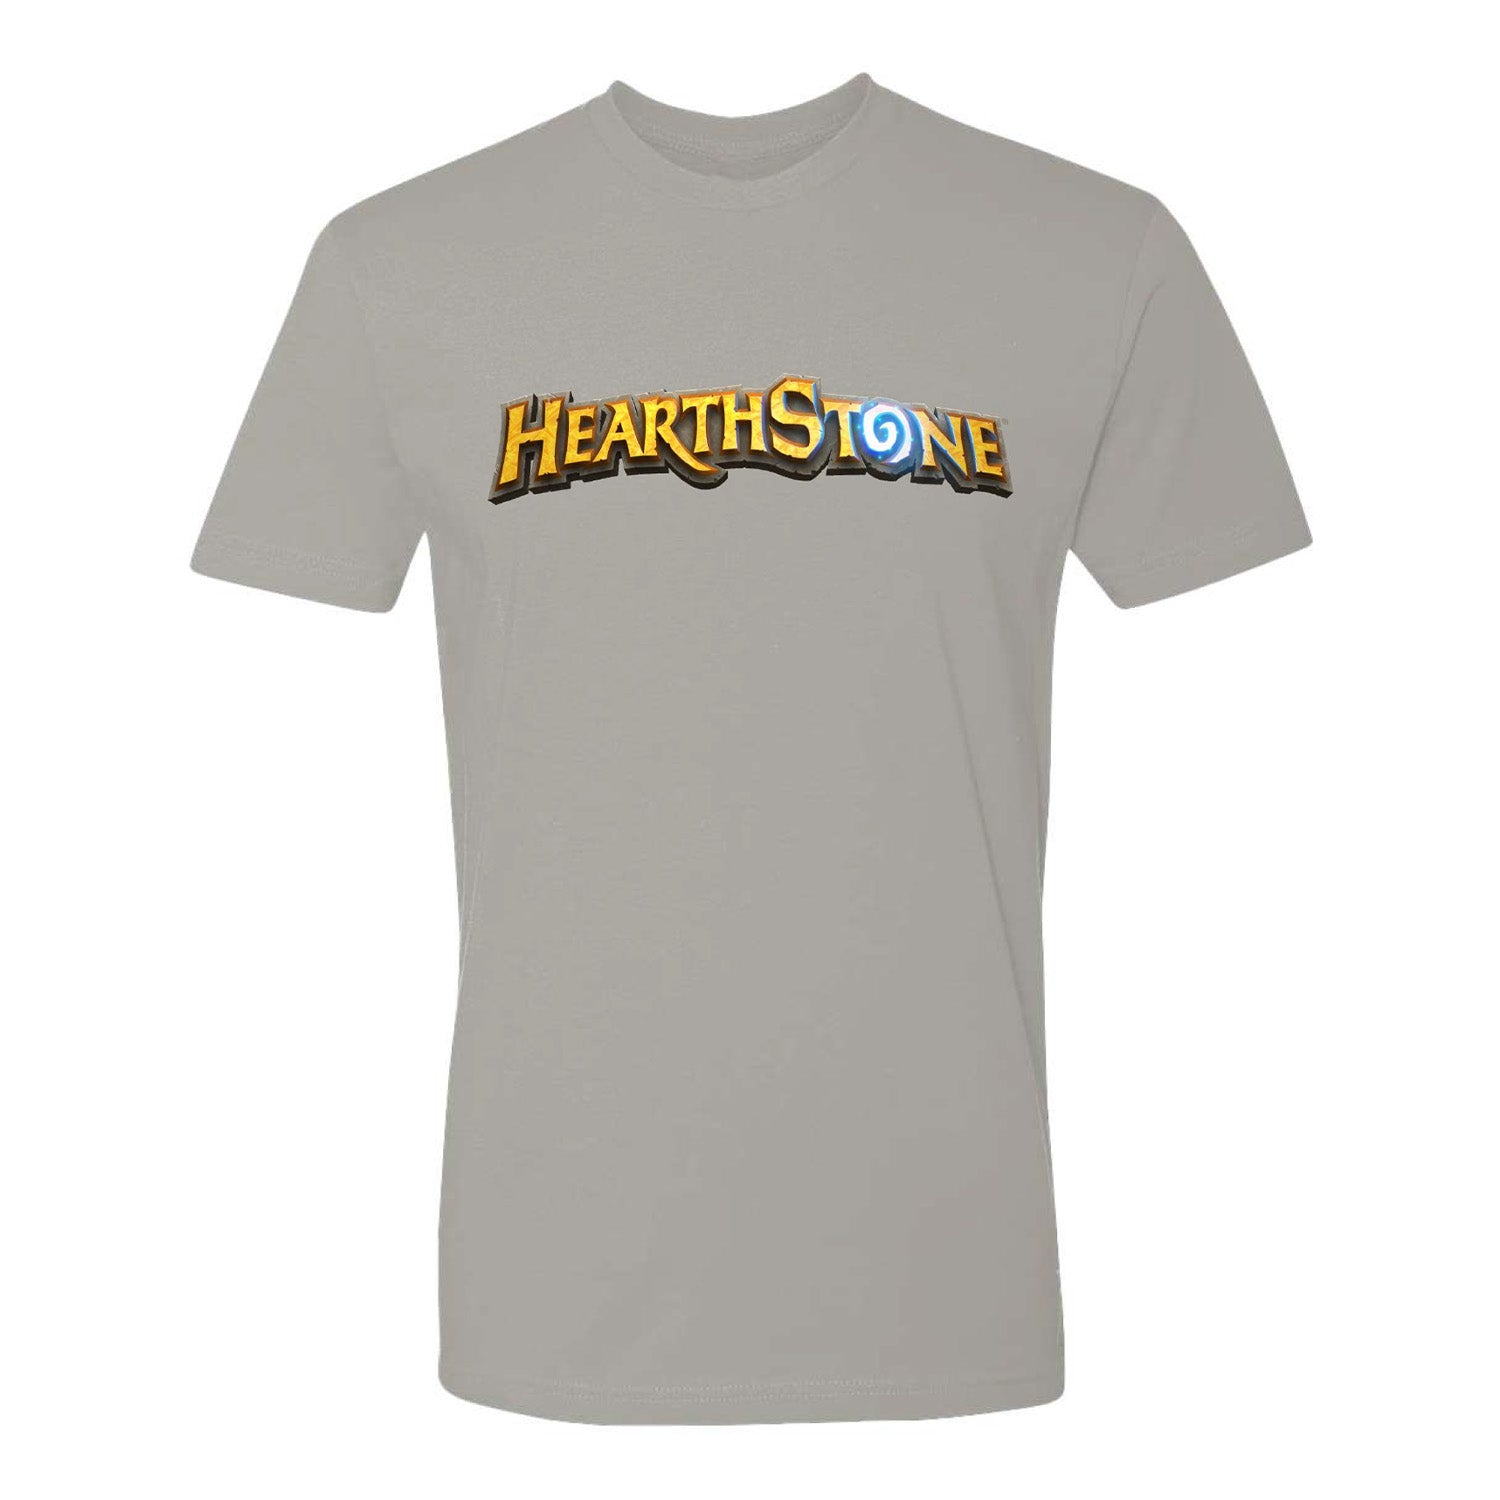 Hearthstone Logo T-Shirt - Front View Grey Version